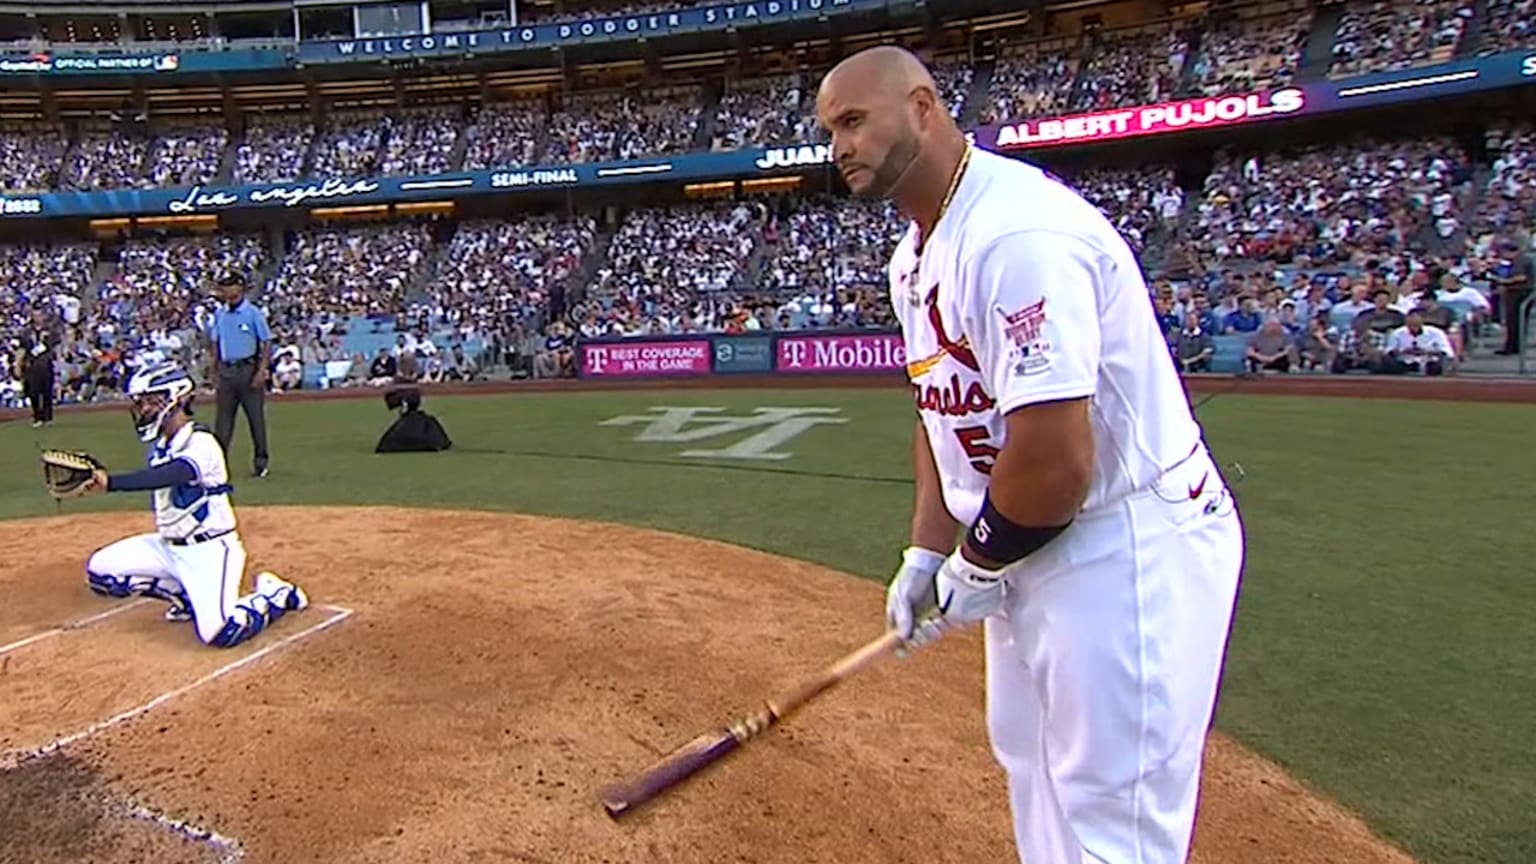 Welcome back, Albert Pujols, who could have been a Ray